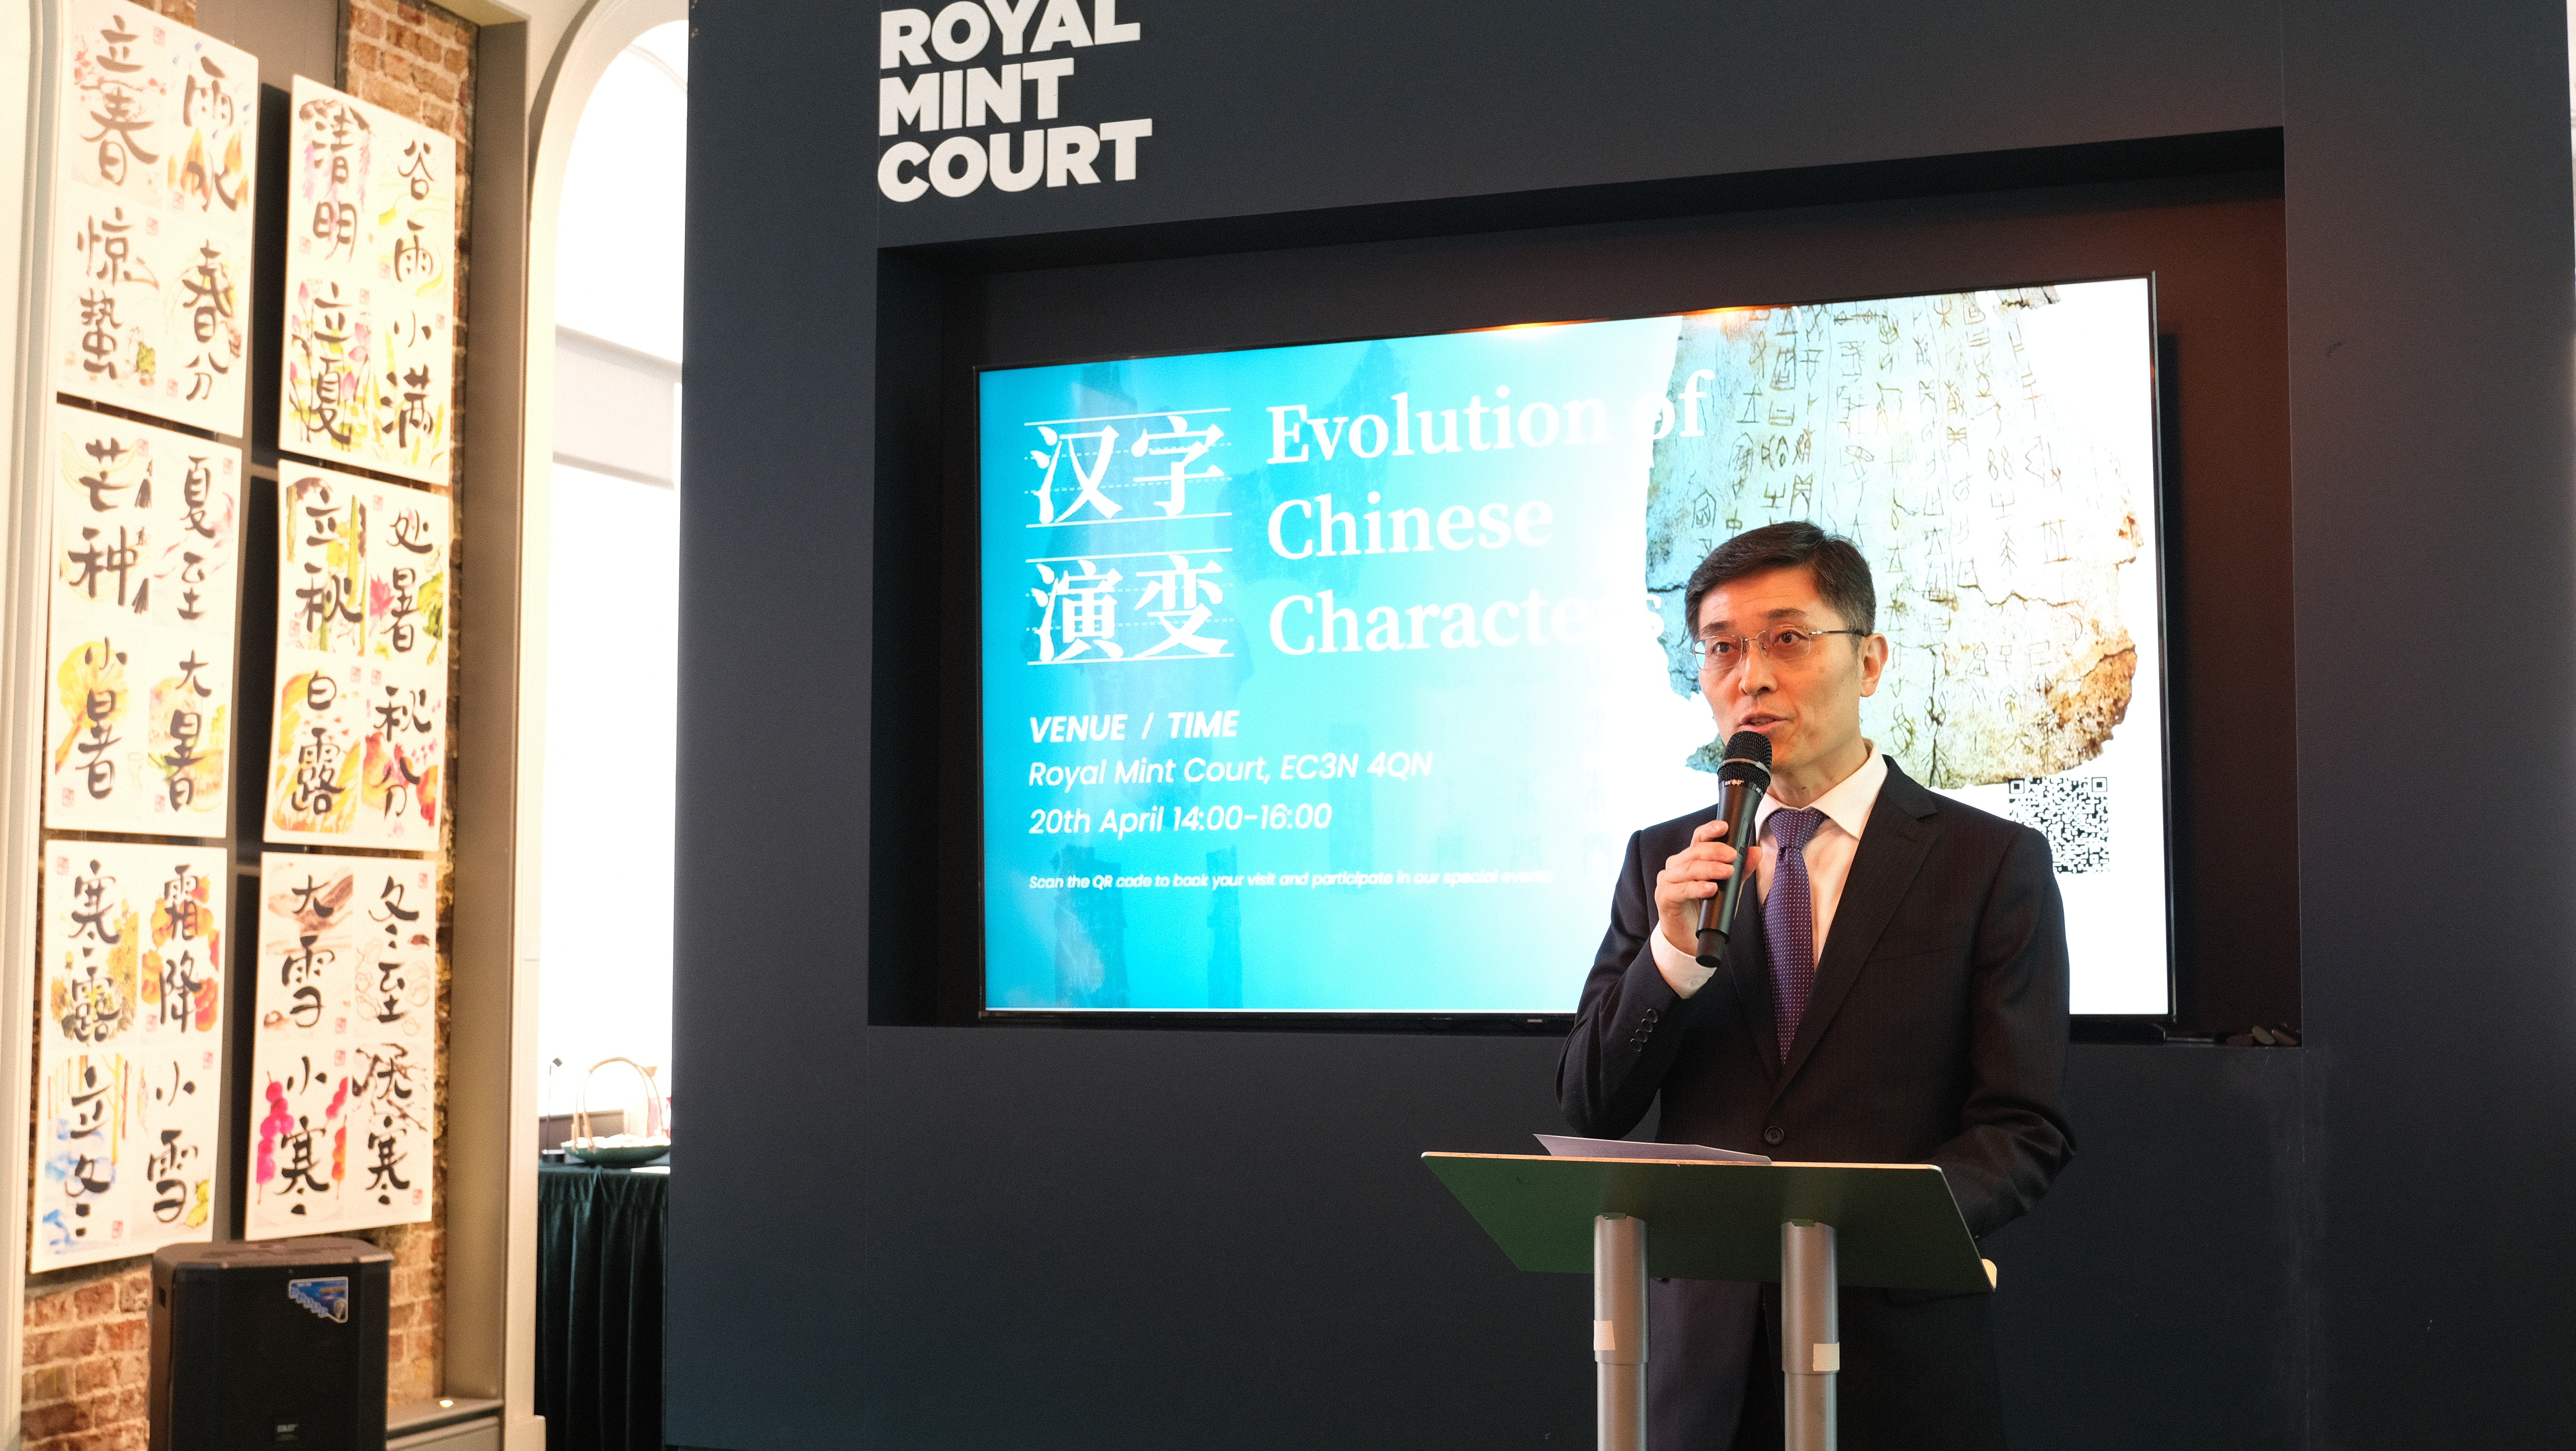 Minister Yang Xiaoguang of the Chinese Embassy in the UK addressed the event. /CGTN